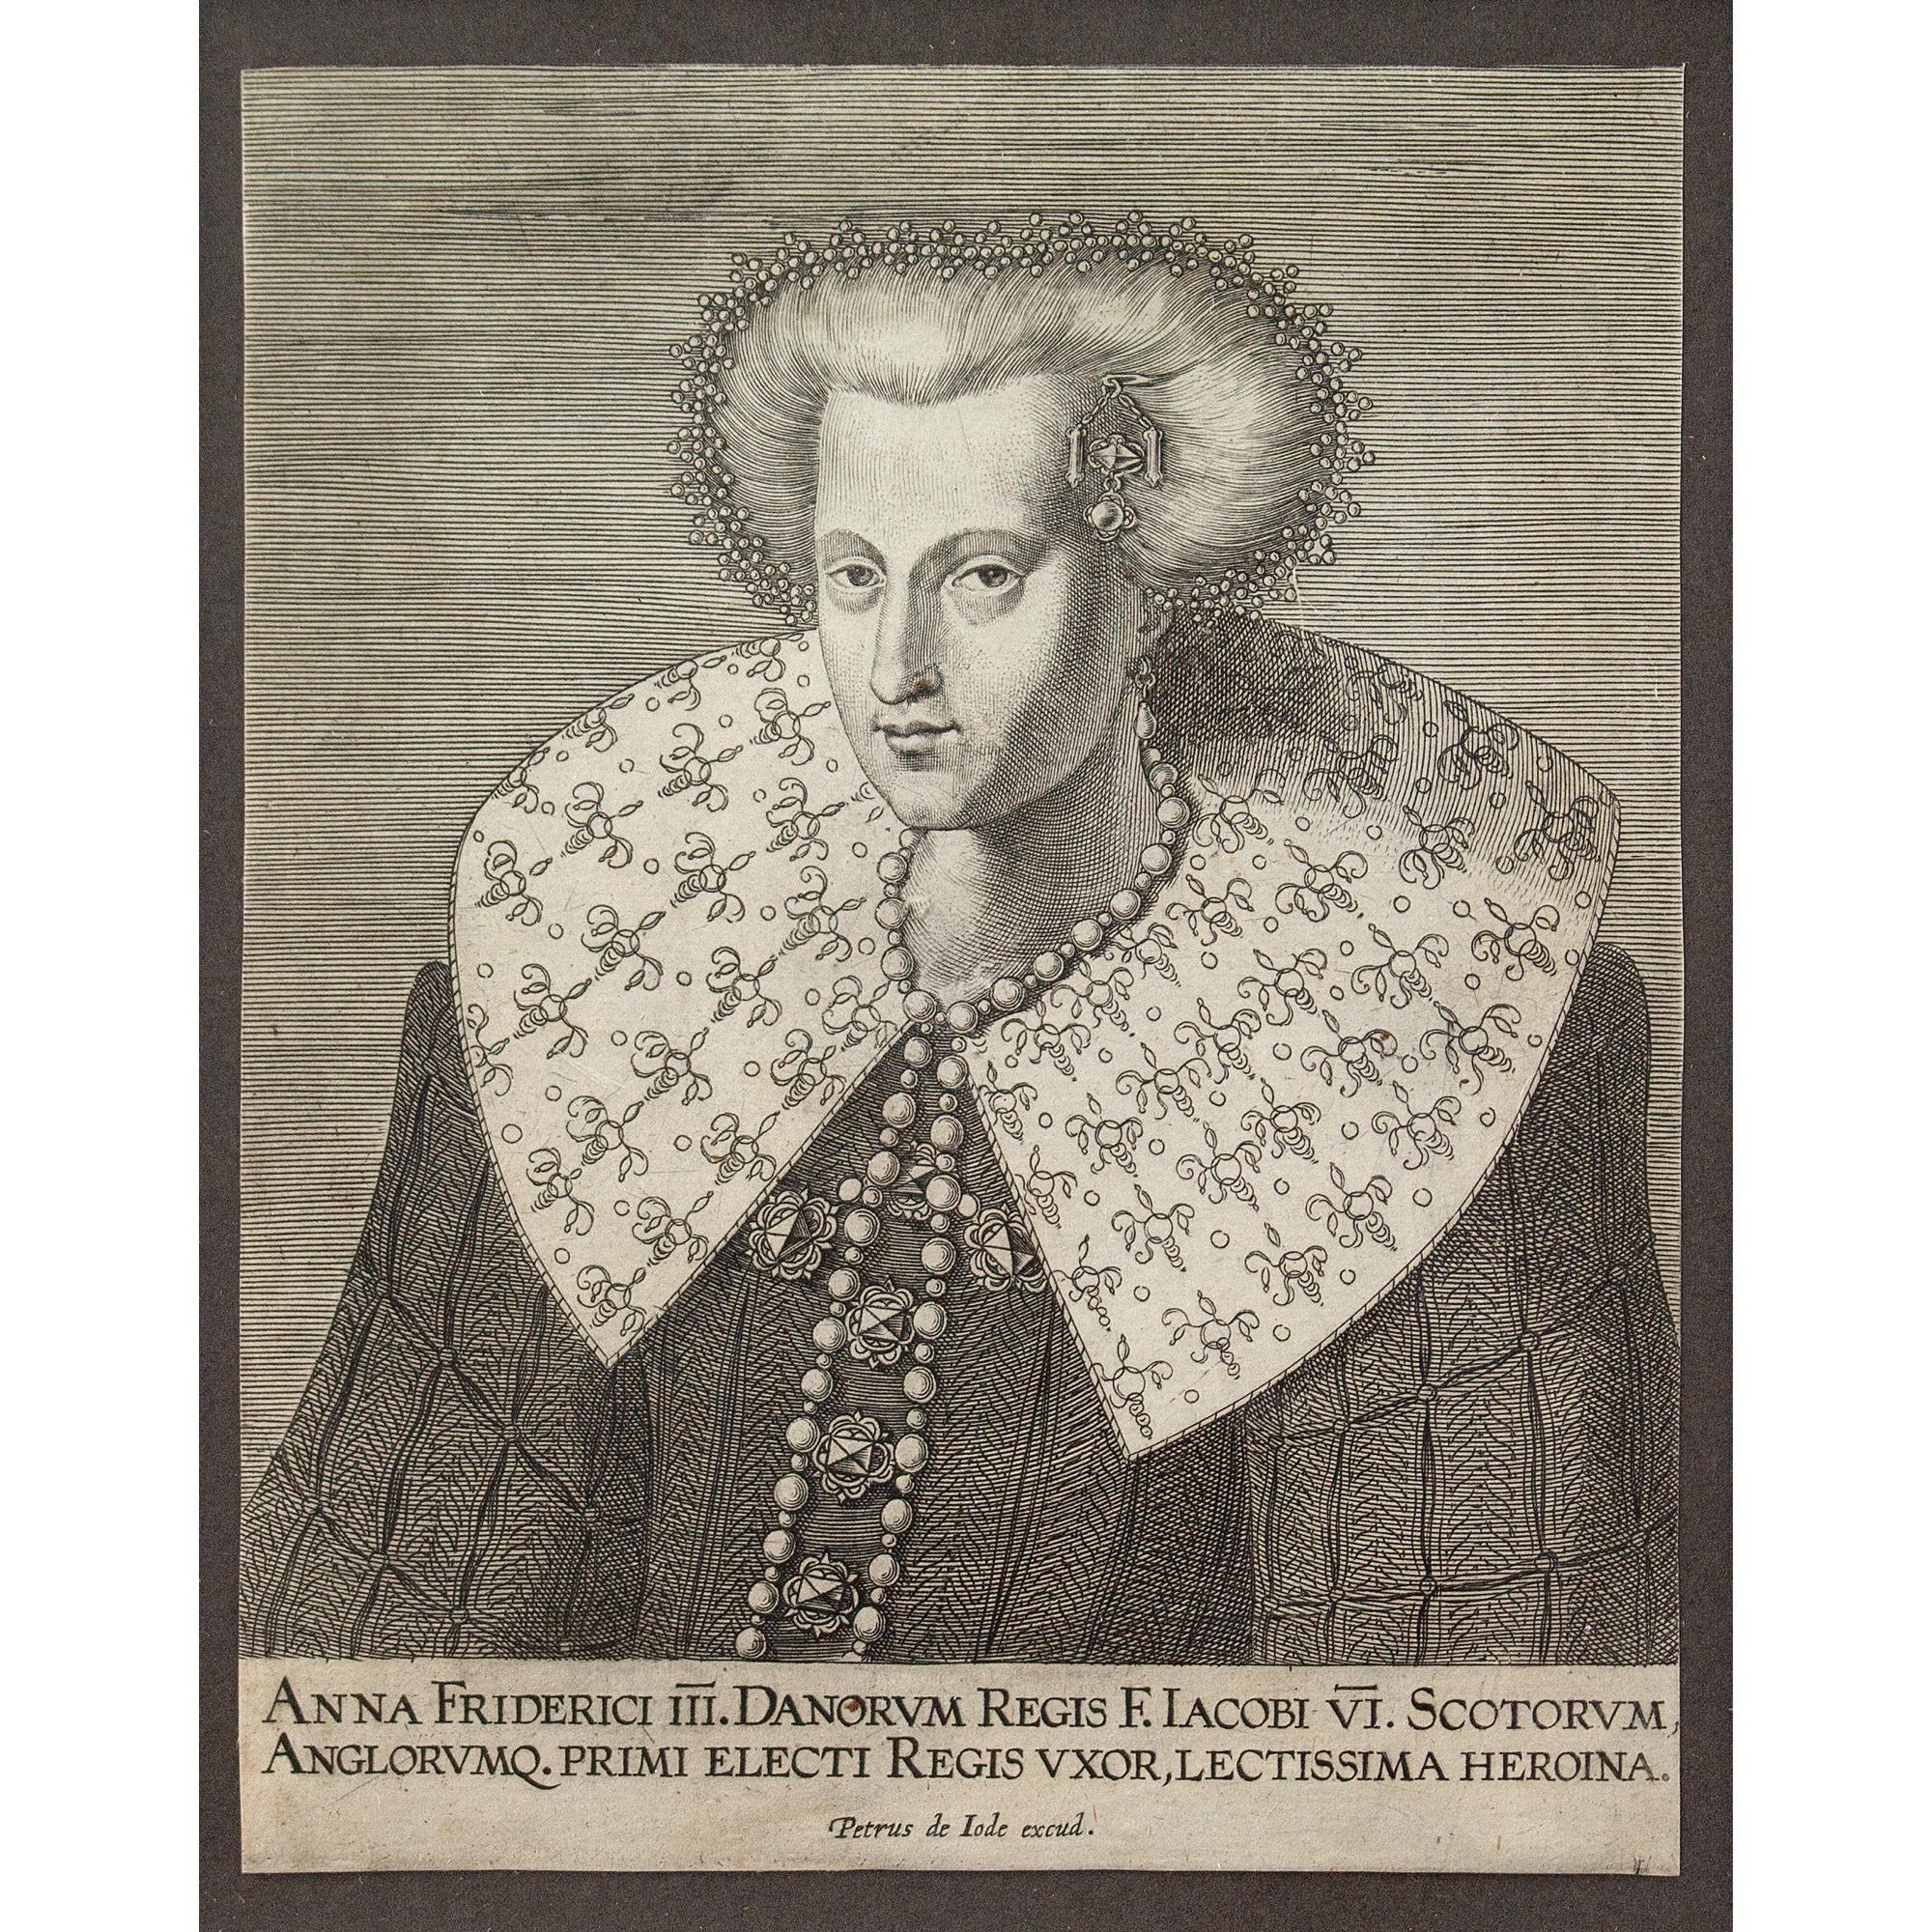 This historic early 17th-century engraving by Flemish printmaker Pieter de Jode the Elder (1570-1634) depicts Anne of Denmark, Queen Consort of Great Britain. It’s around 400 years old and a remarkable survivor.

Pieter de Jode the Elder produced